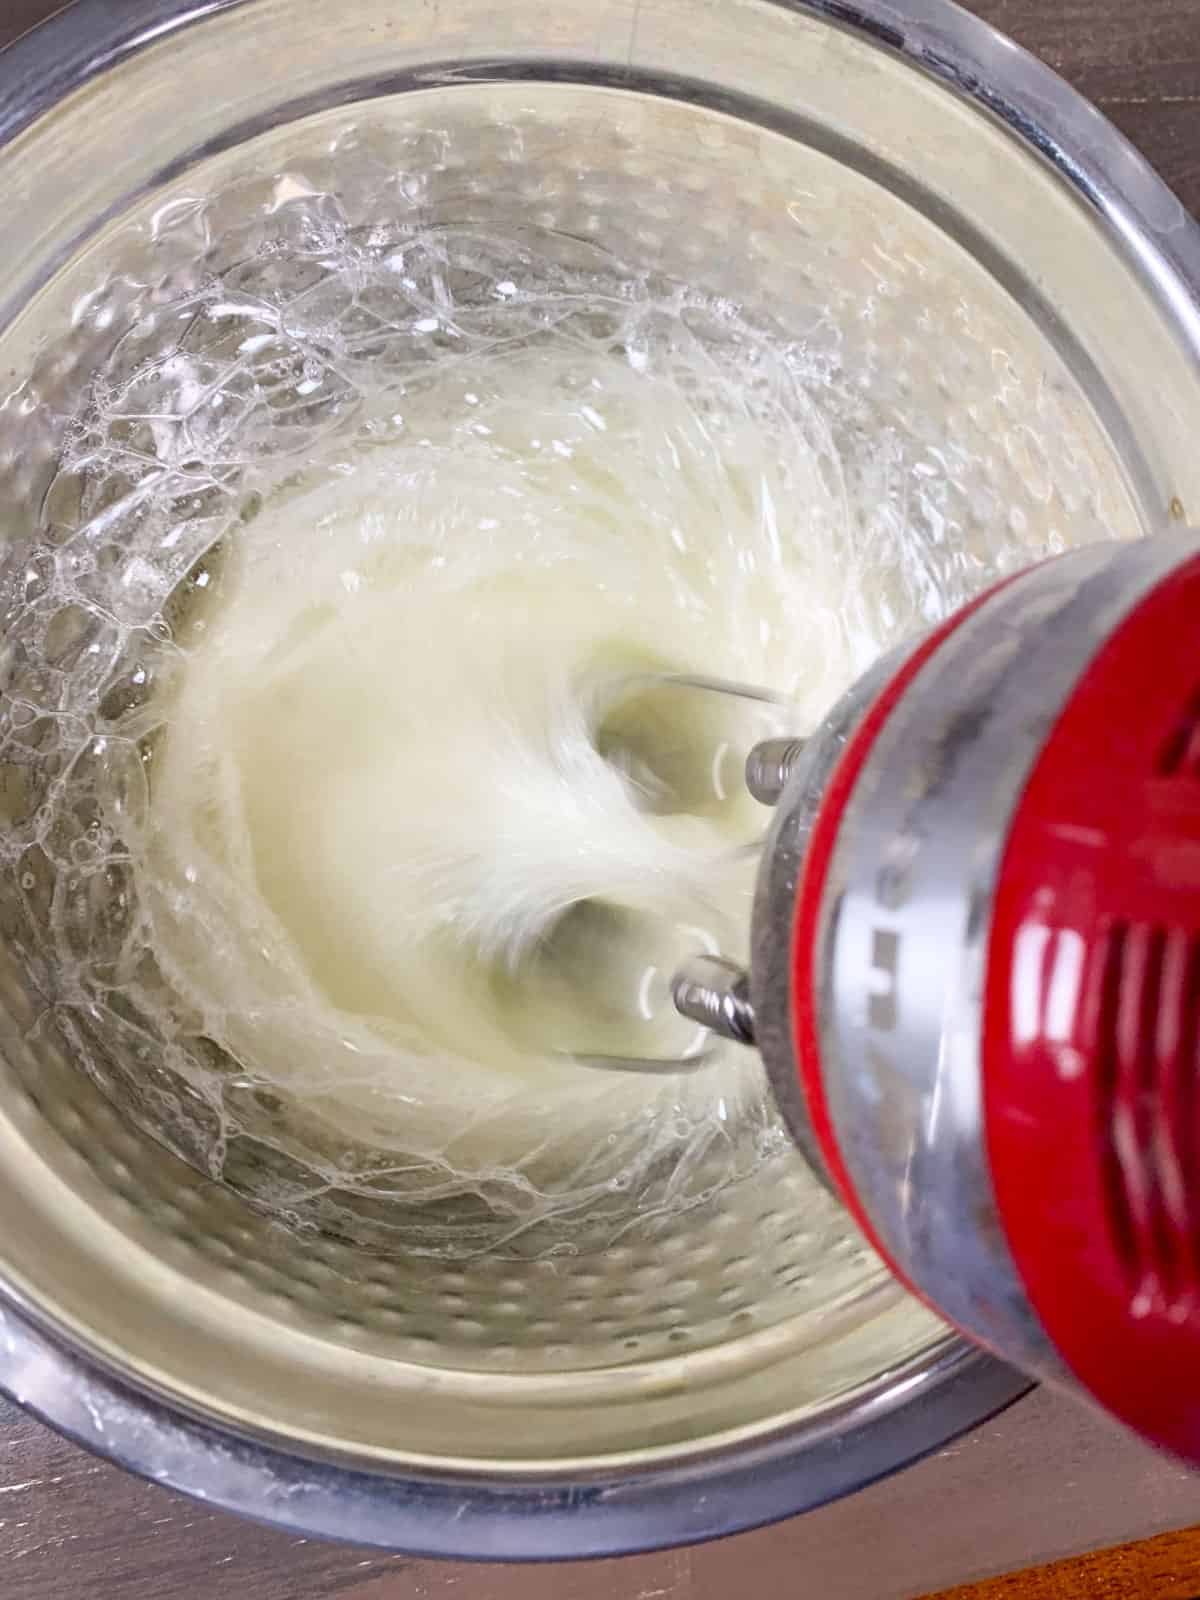 beating the egg whites in a clean bowl.